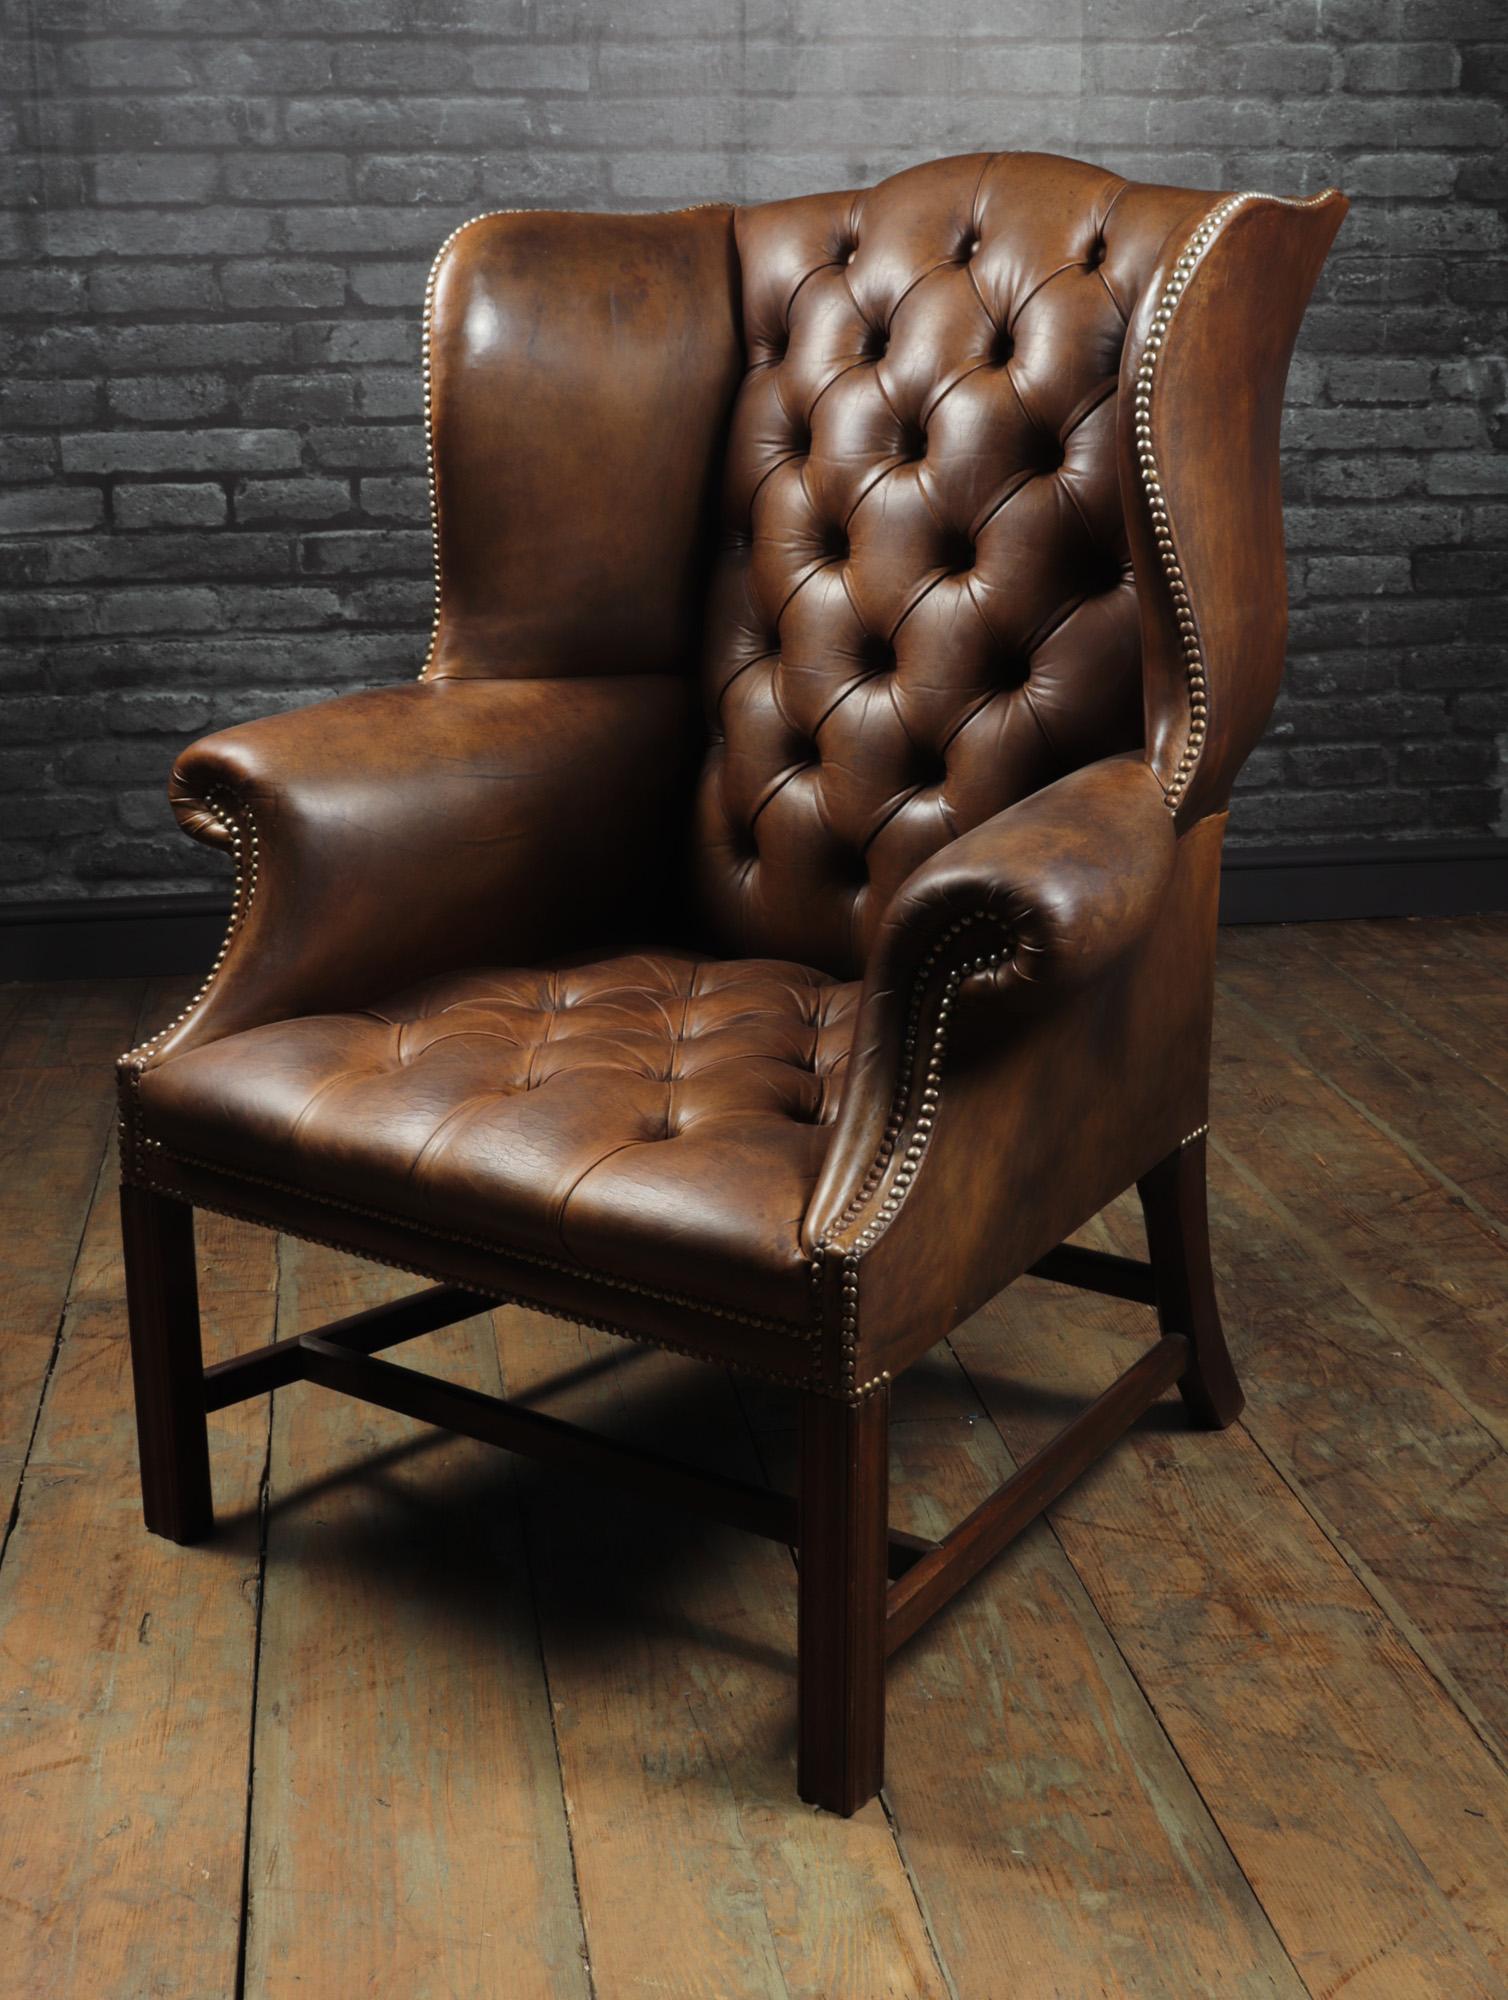 Georgian style brown buttoned leather wing chair
A deep buttoned sprung seat and back thick hyde leather then hand dyed in chestnut brown with brass studded detail. Produced in England around 1960, made in the Georgian period style and of very high